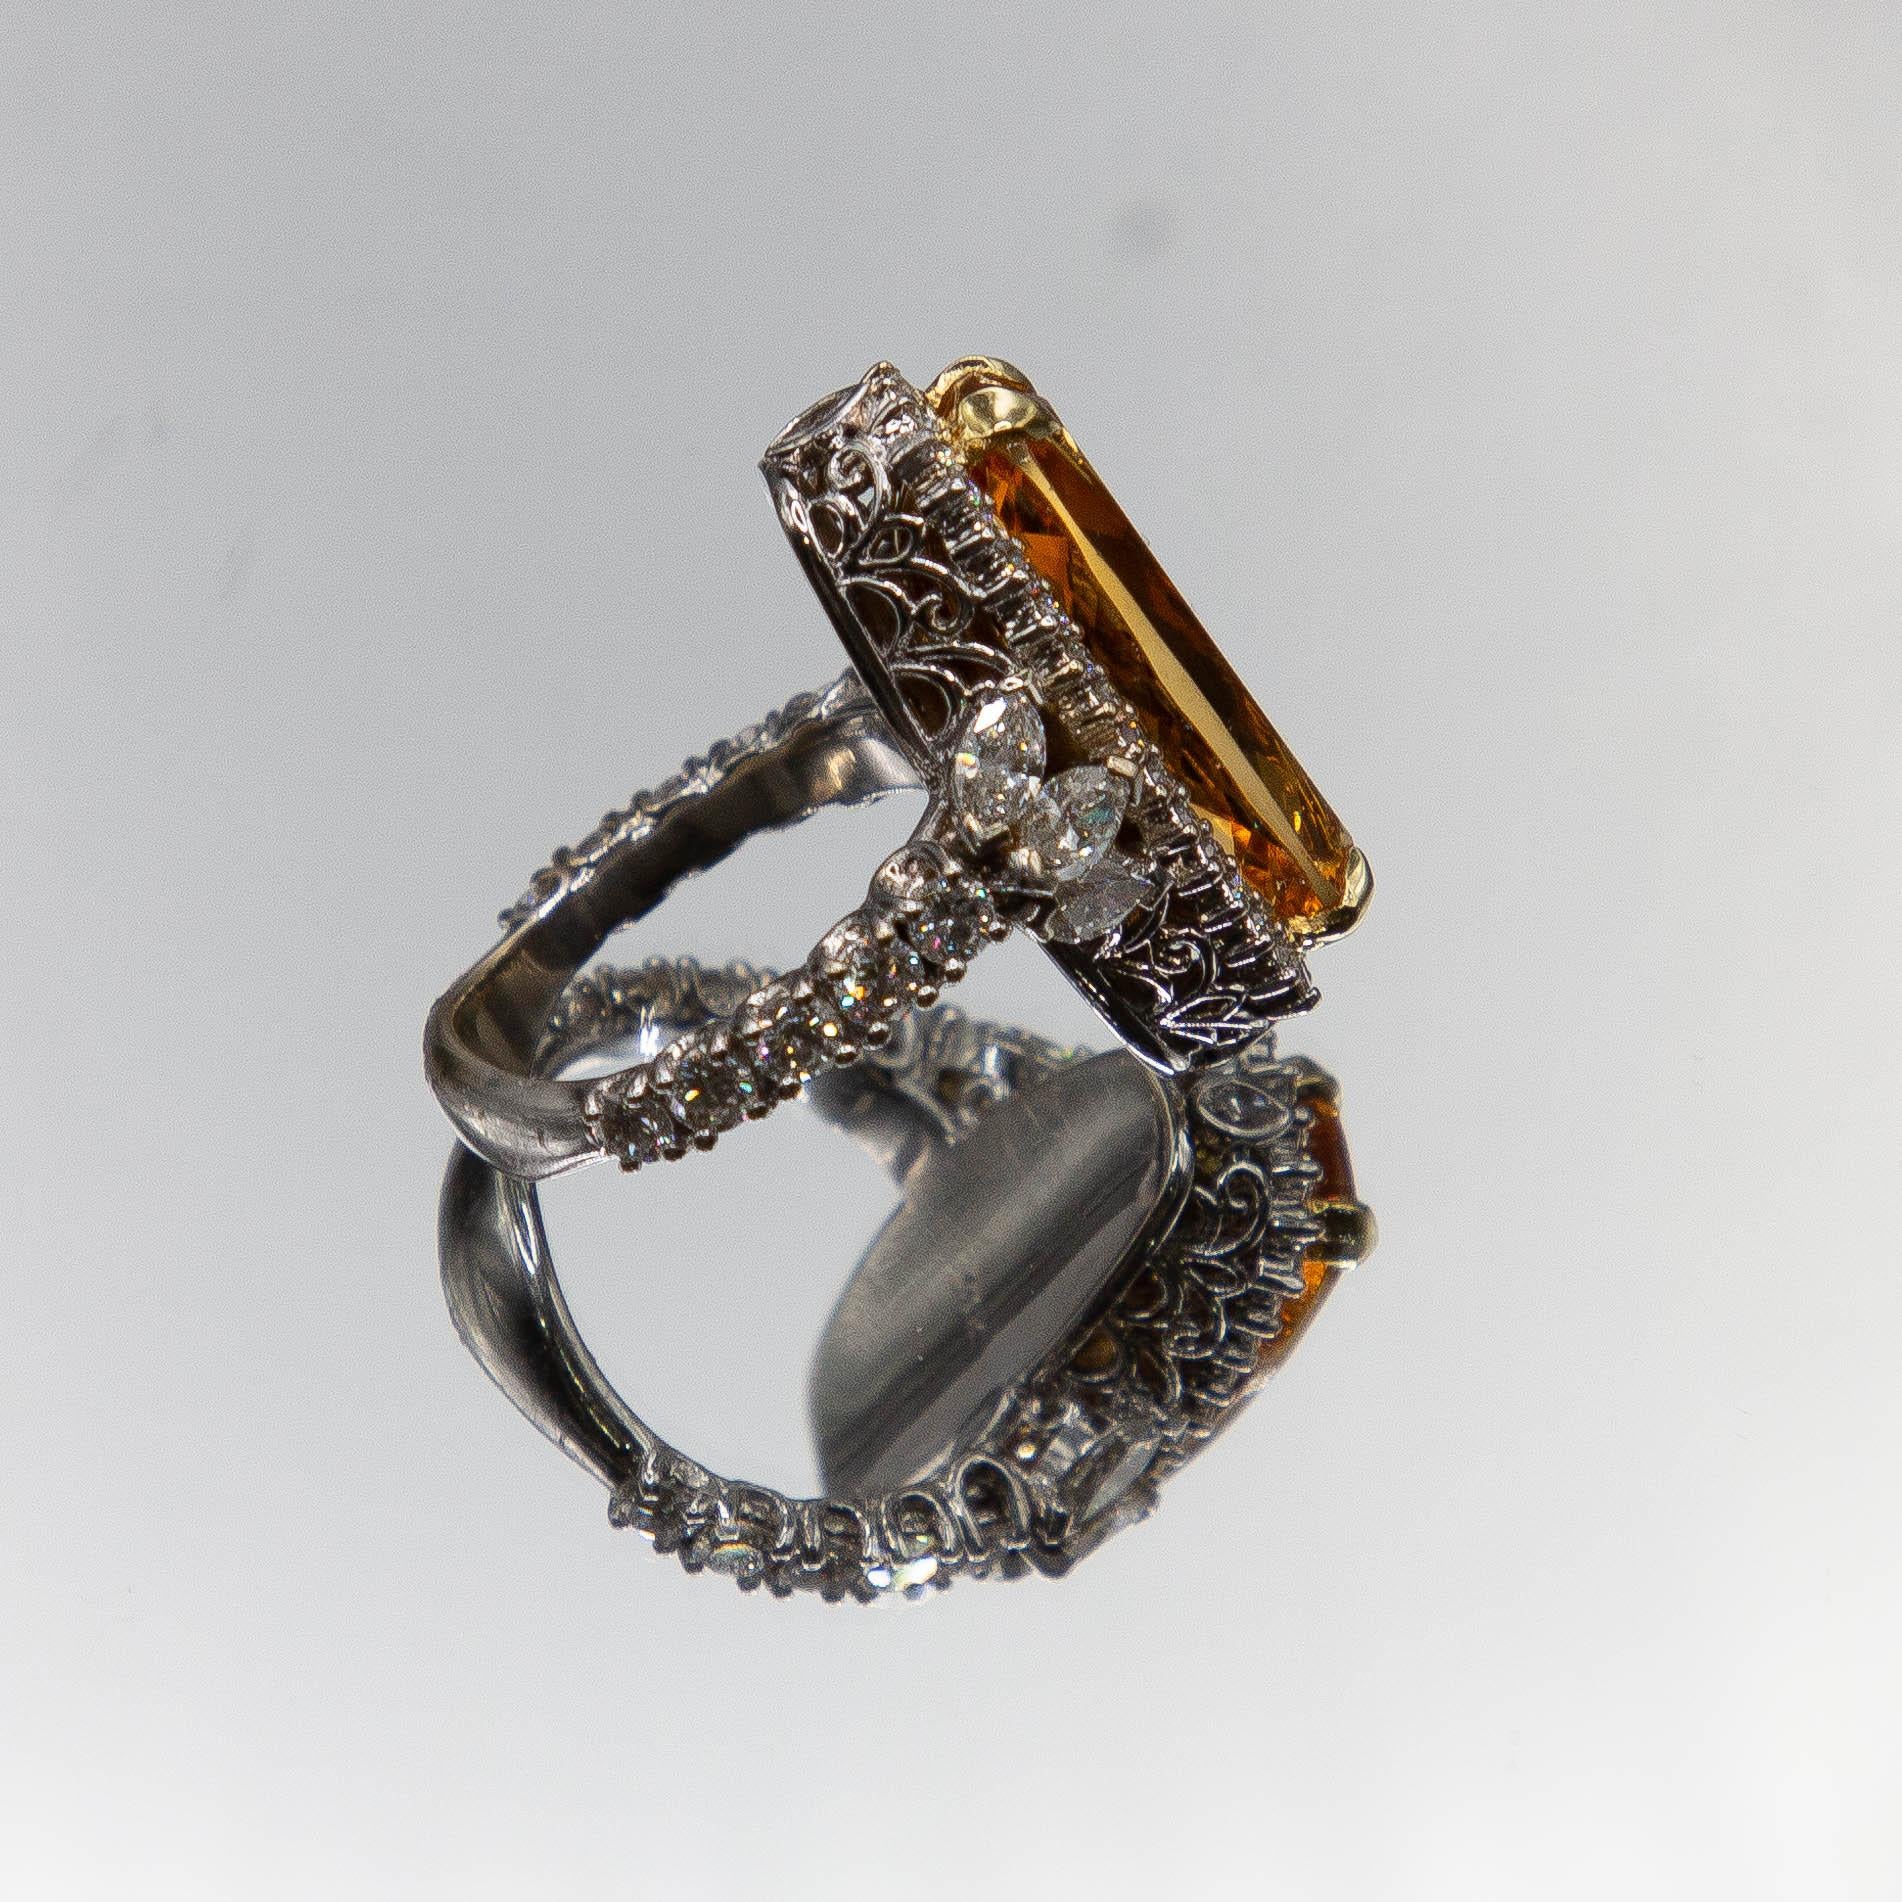 One of a kind 18k white and yellow gold handcrafted ring by renowned designer Anthony Gerard  DiMaggio features, an Idar- Oberstein commissioned, fancy cushion cut 10.02 carat Imperial Topaz. The original gem rough, holding a rare and intense pure